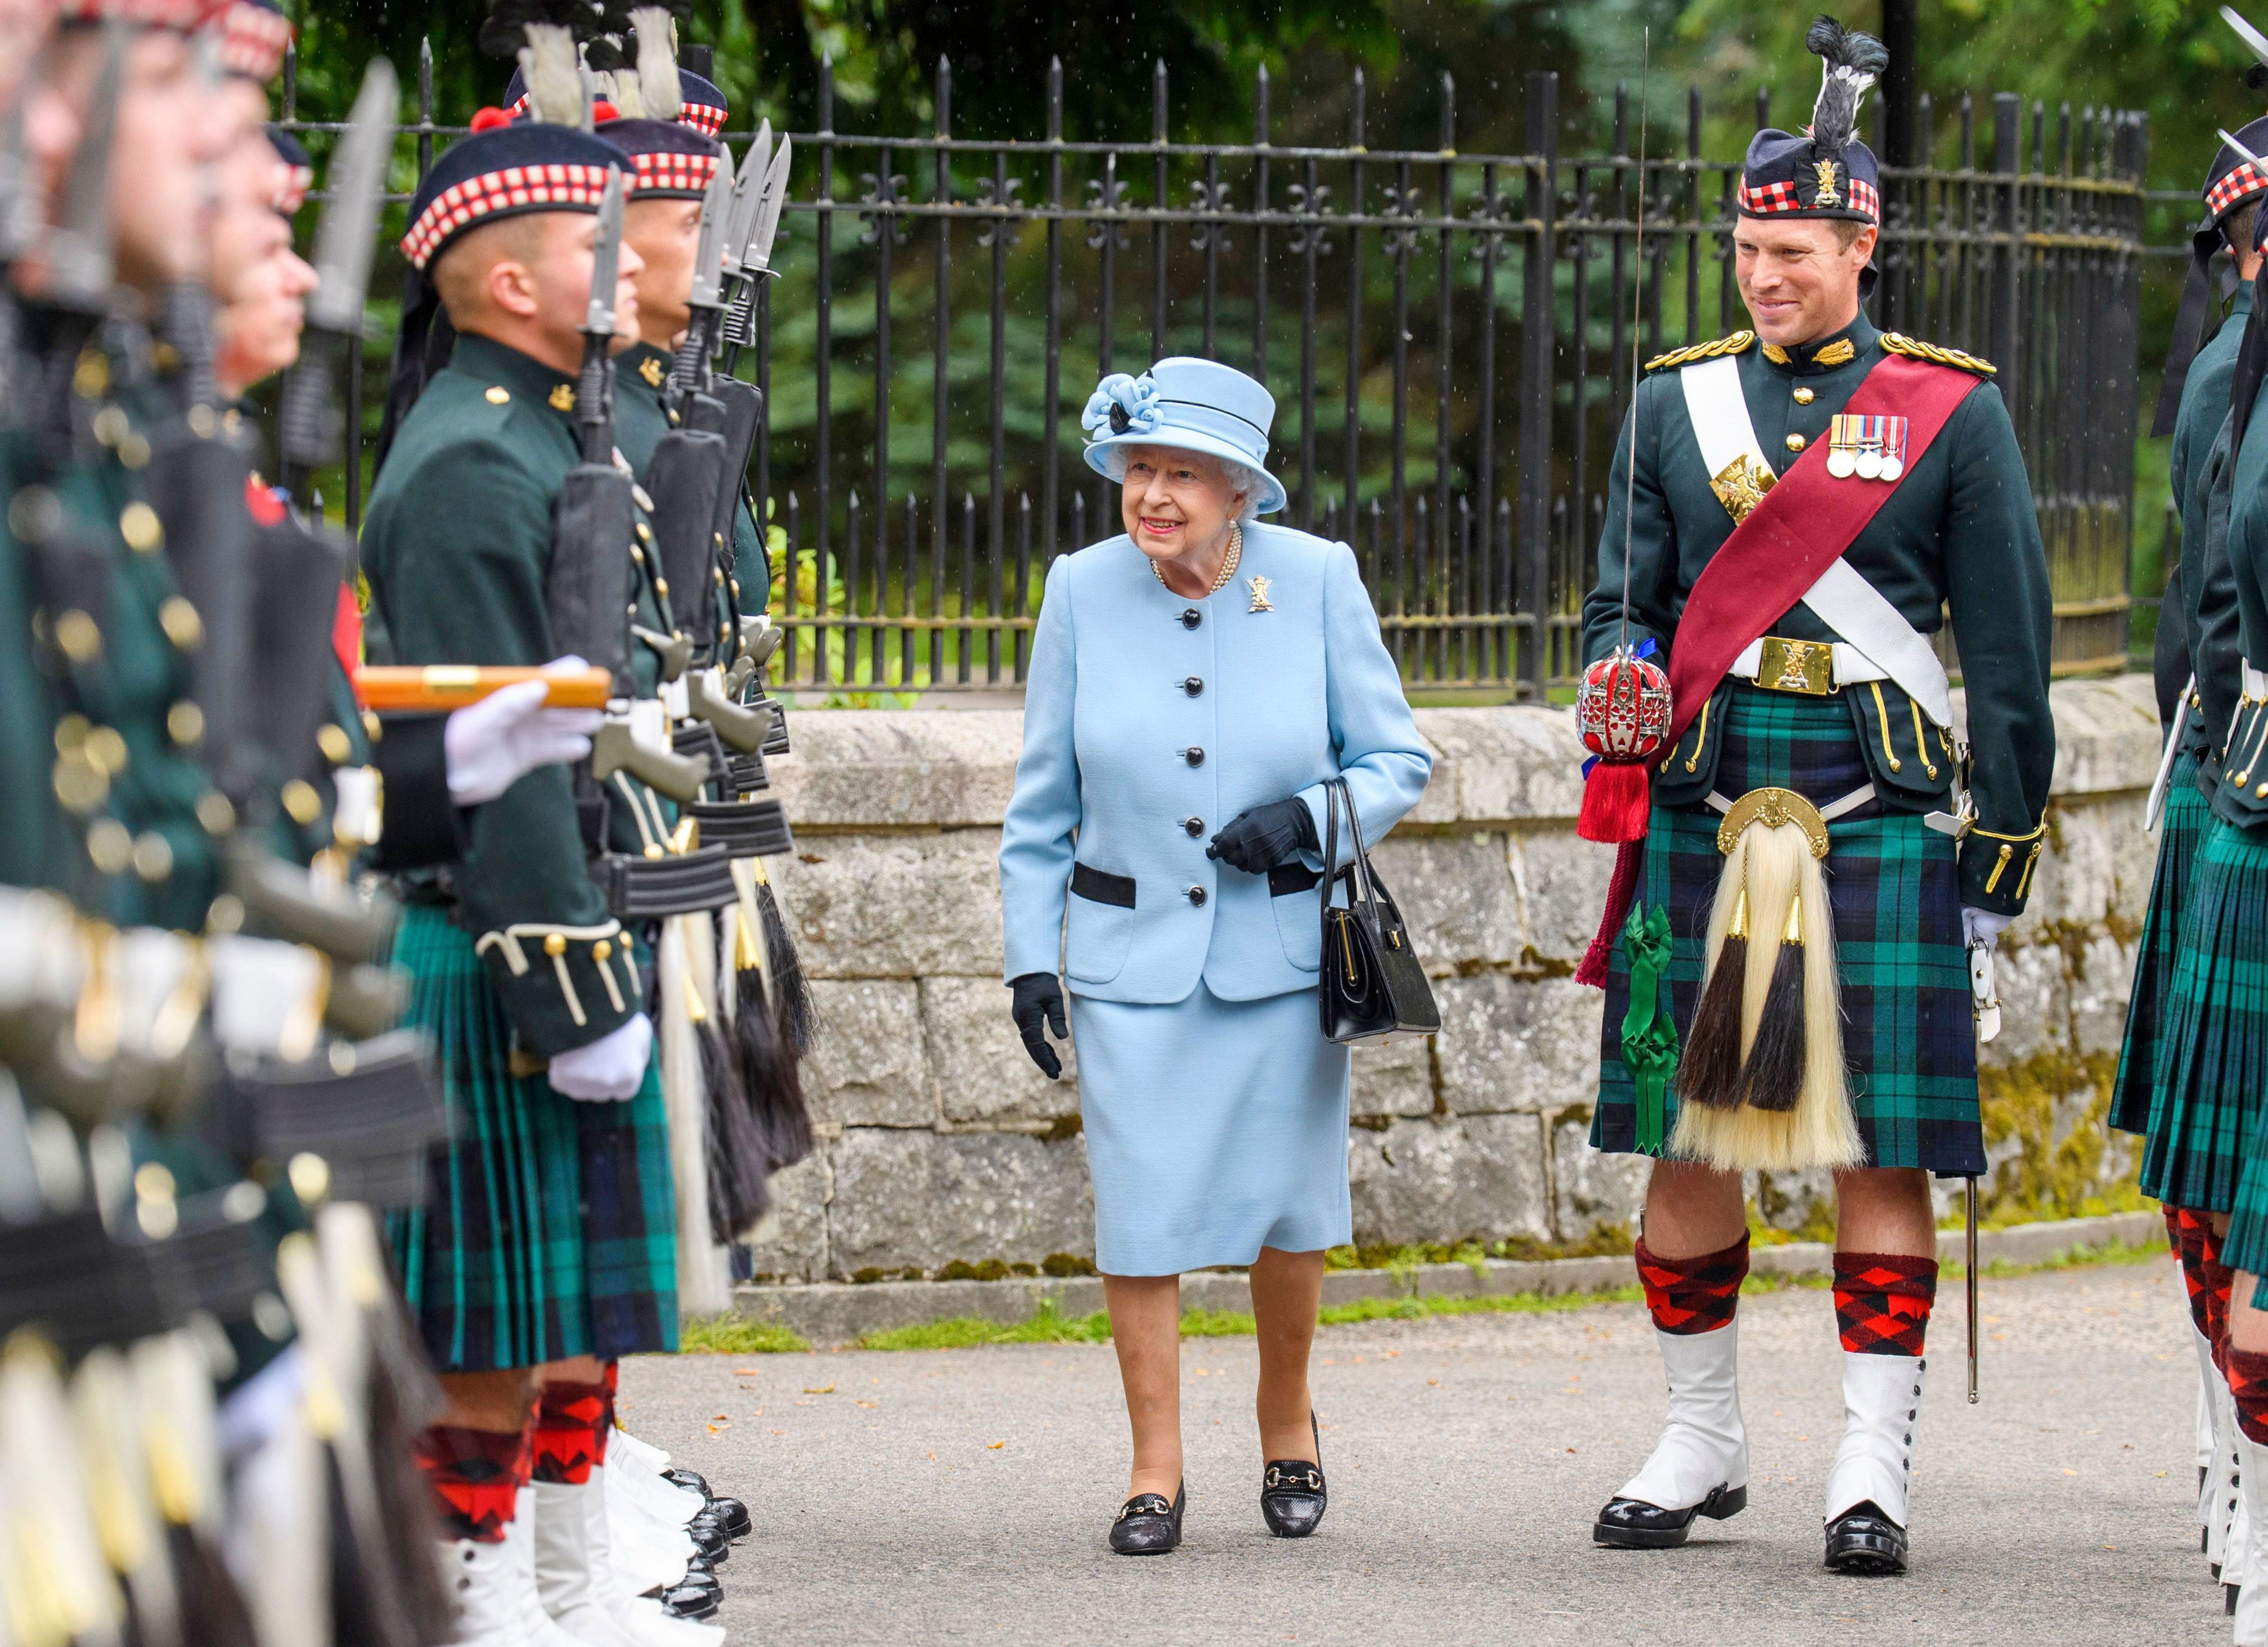 <p>Queen Elizabeth II was officially welcomed to Balmoral in Scotland by Balaklava Company 5th Battalion The Royal Regiment of Scotland on Aug. 6, 2019.</p>